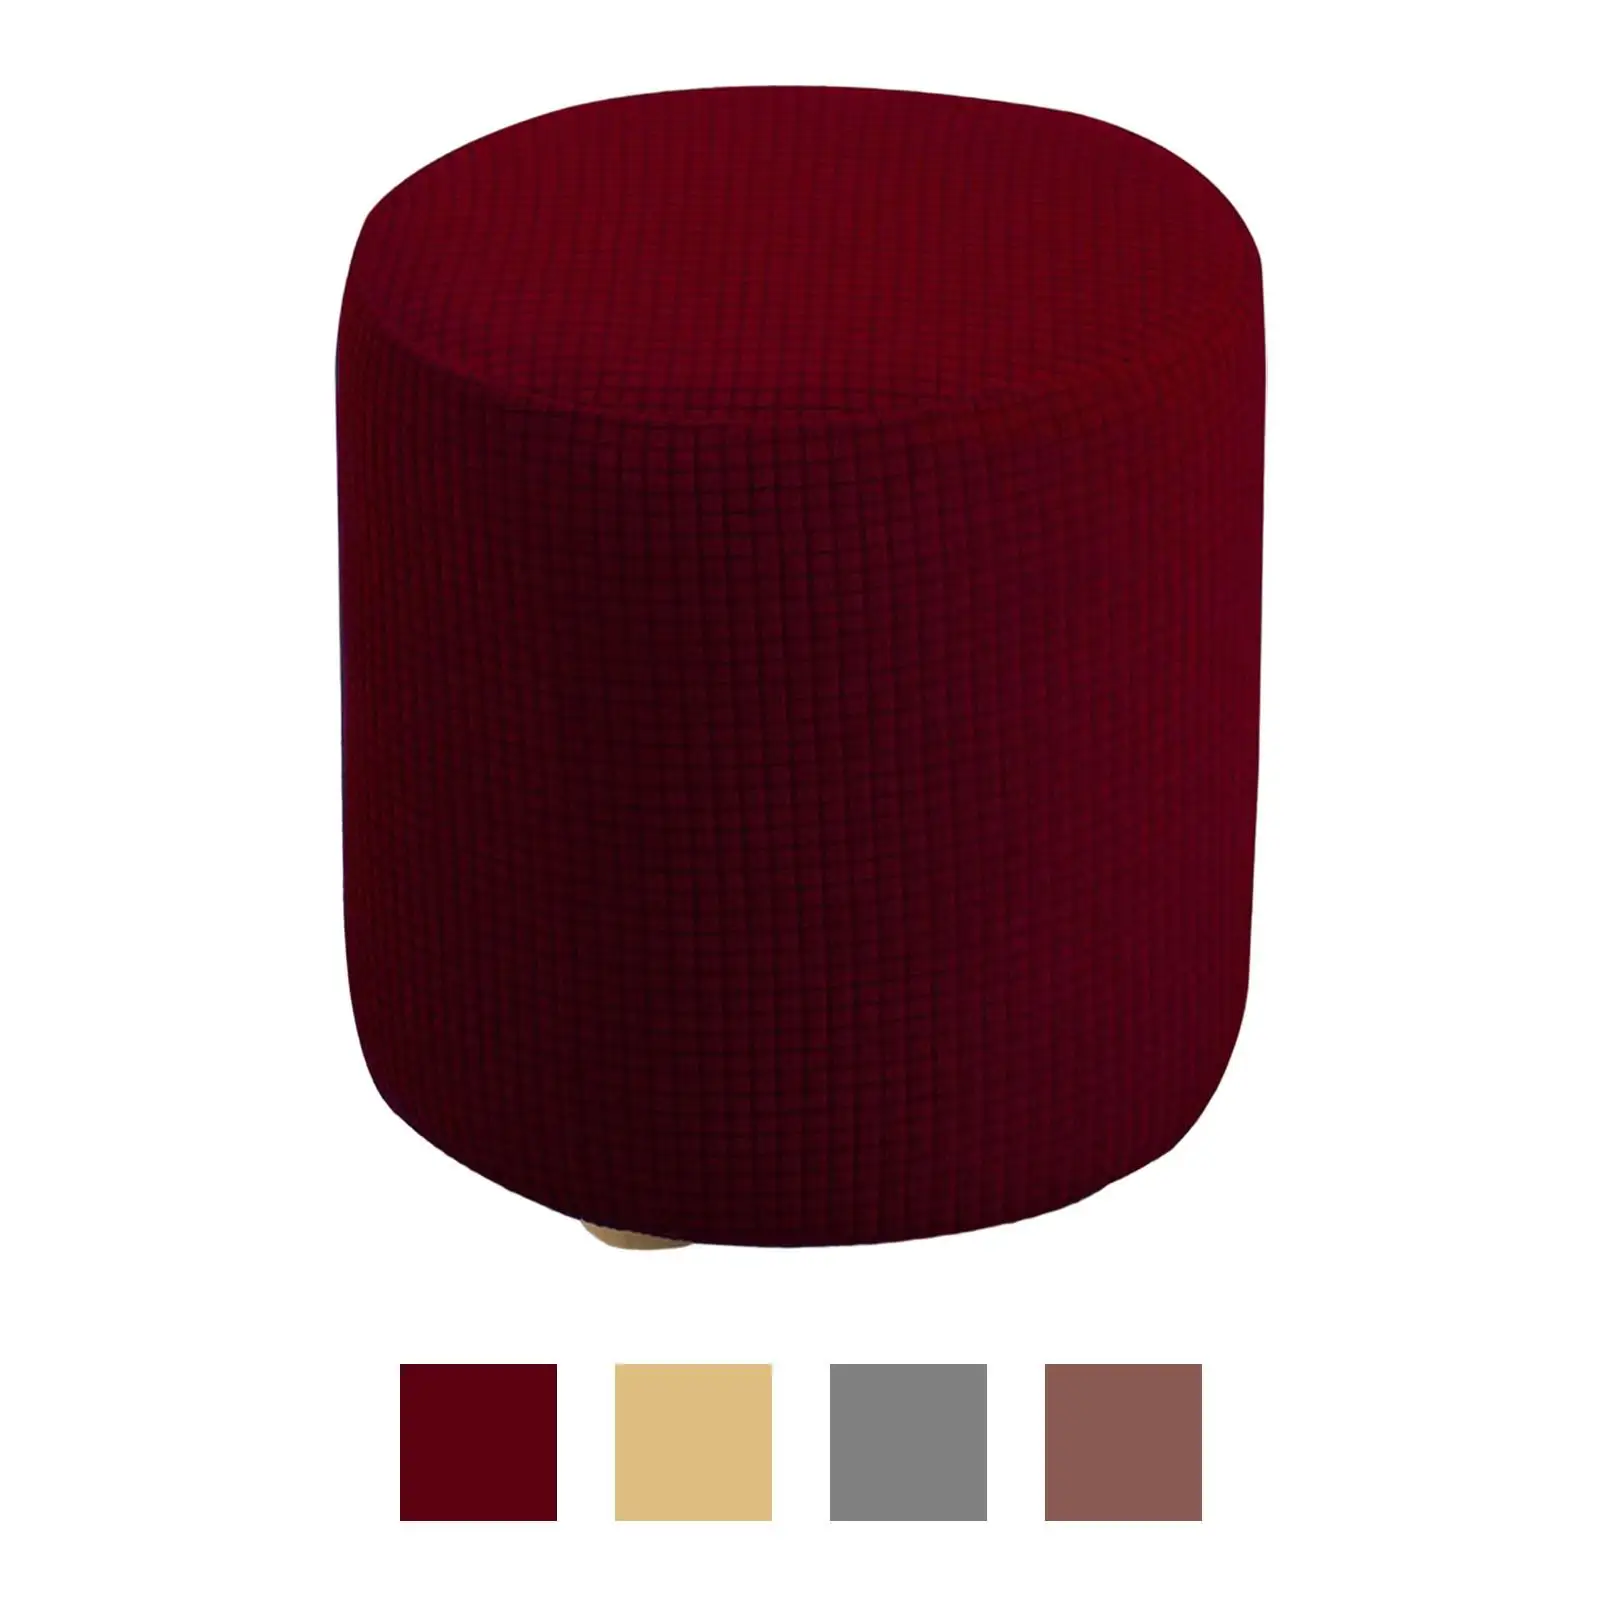 High Stretch Round Ottoman Cover Living Room Storage Ottoman Protect Covers Footstool Slipcover Fits Seat 9.84``-12.60`` inch